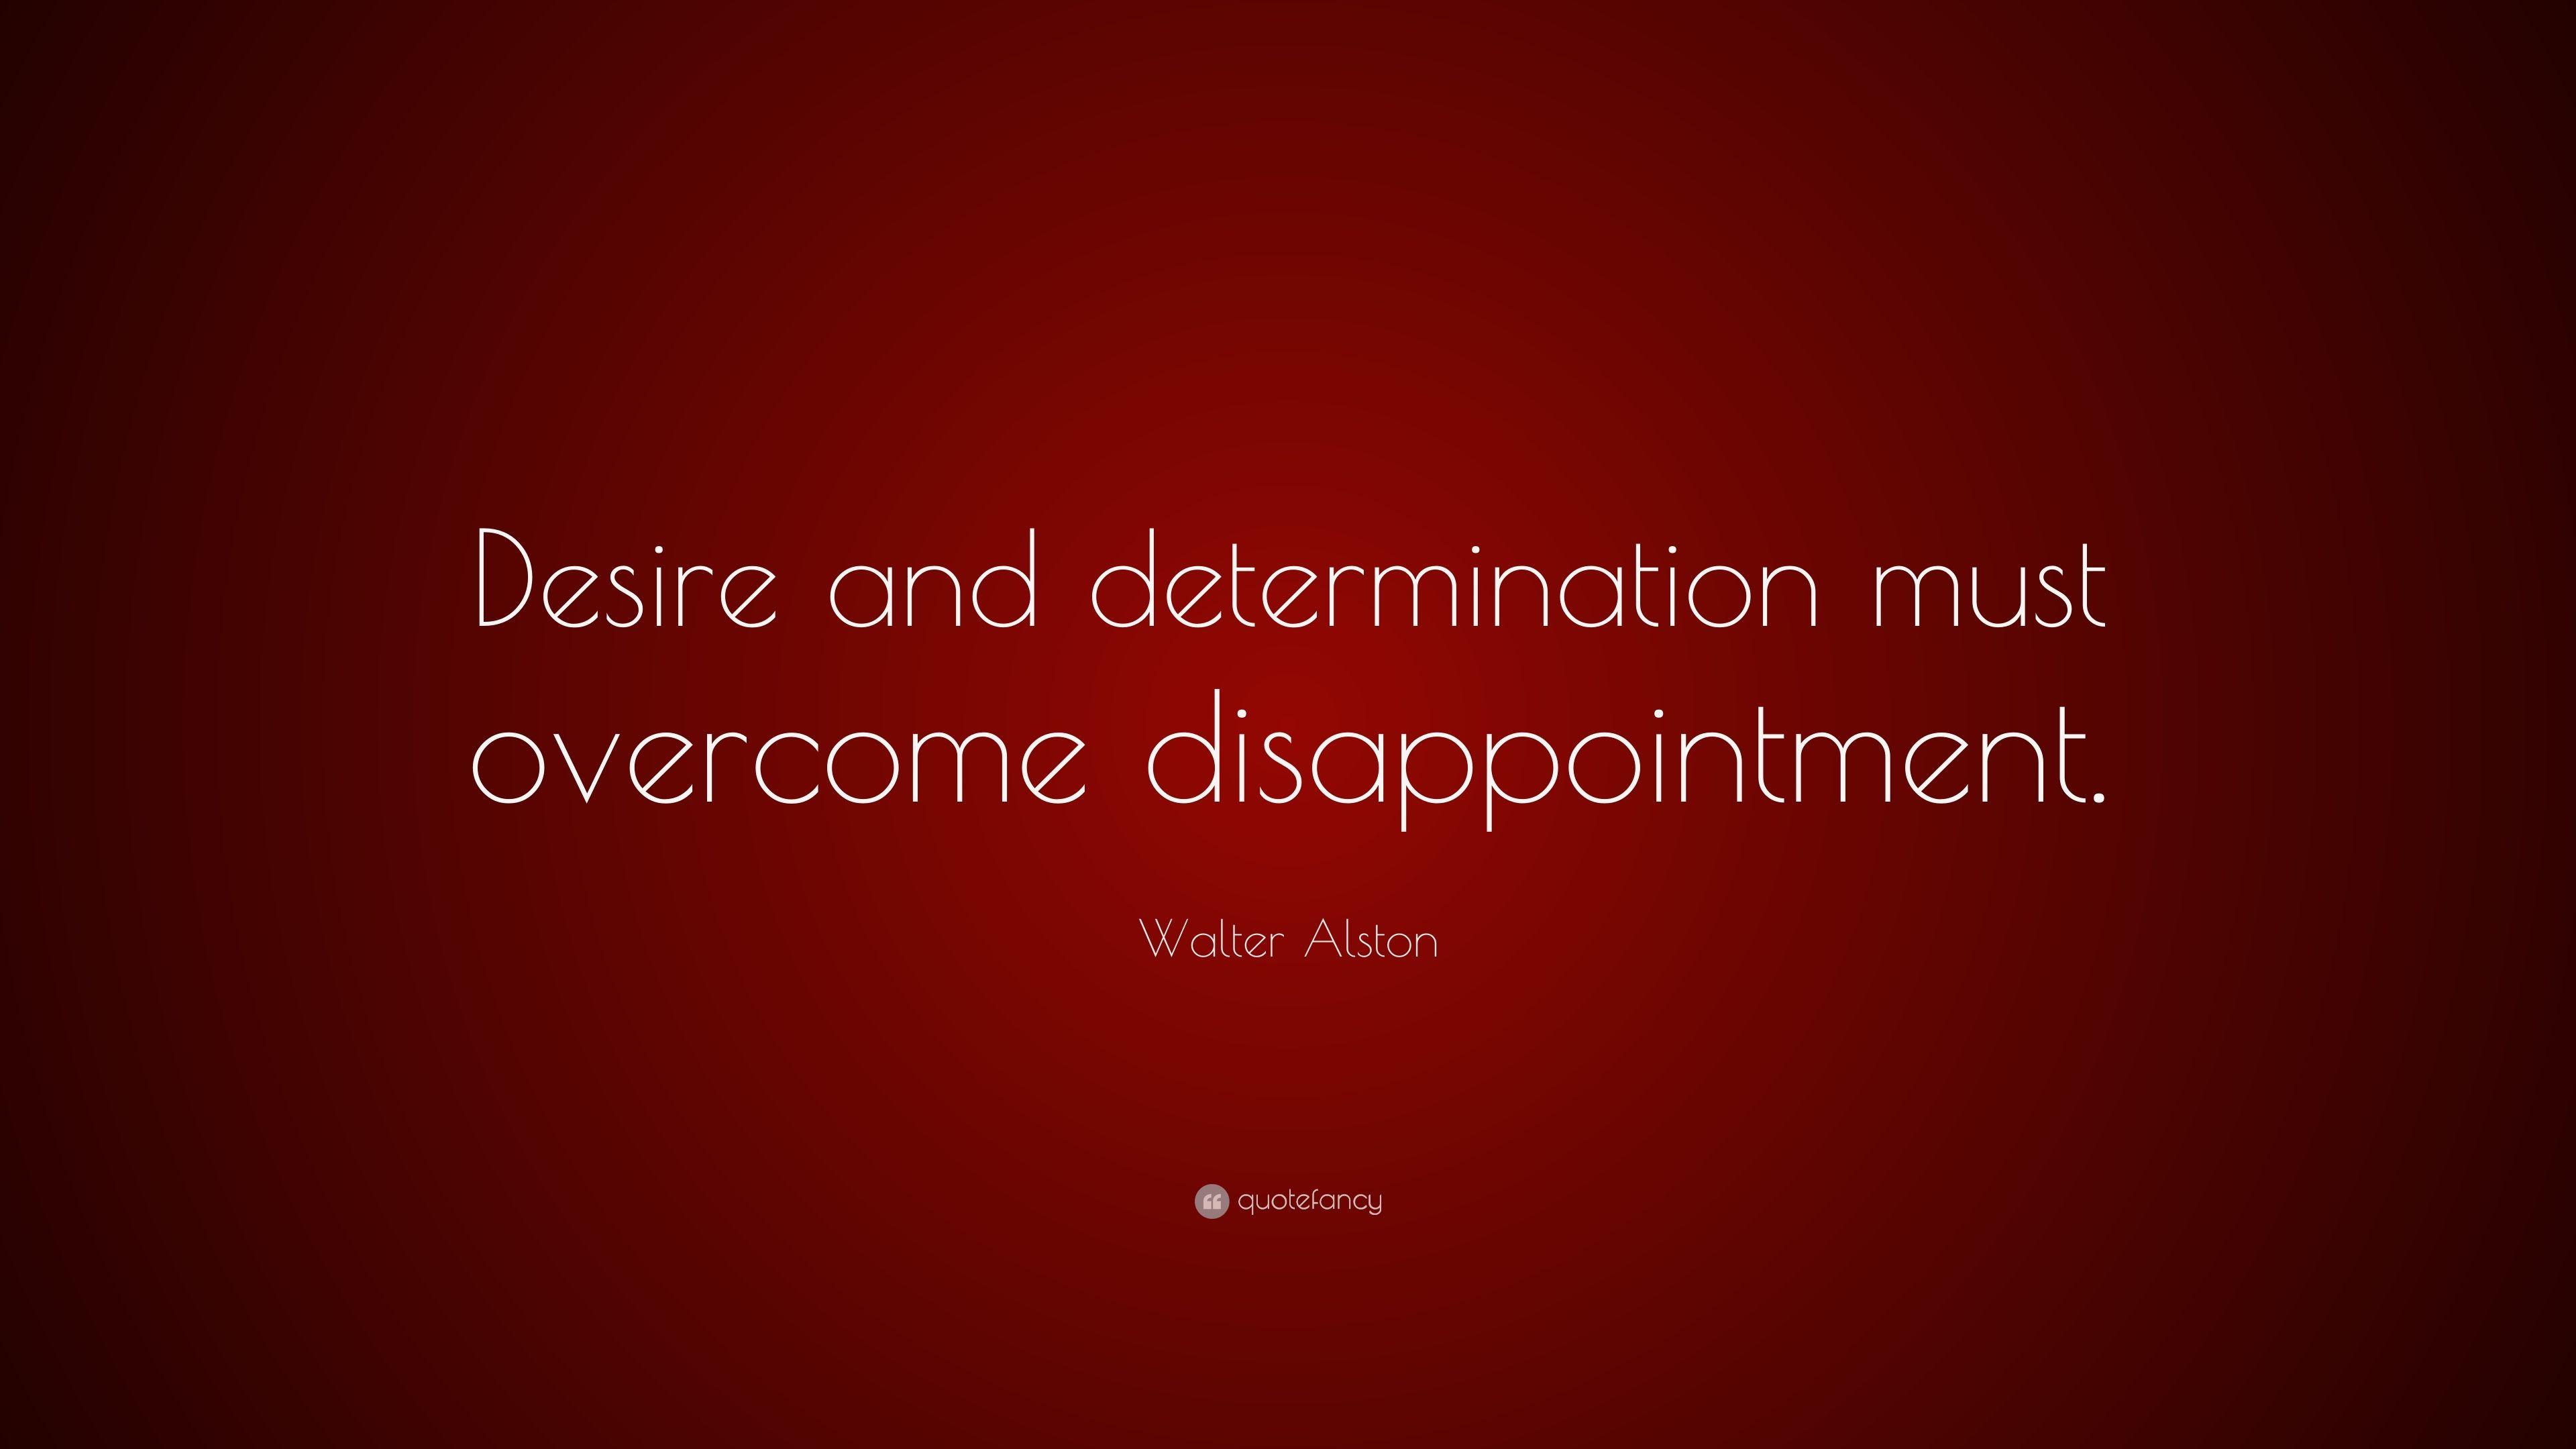 Walter Alston Quote: “Desire and determination must overcome disappointment.” (7 wallpaper)